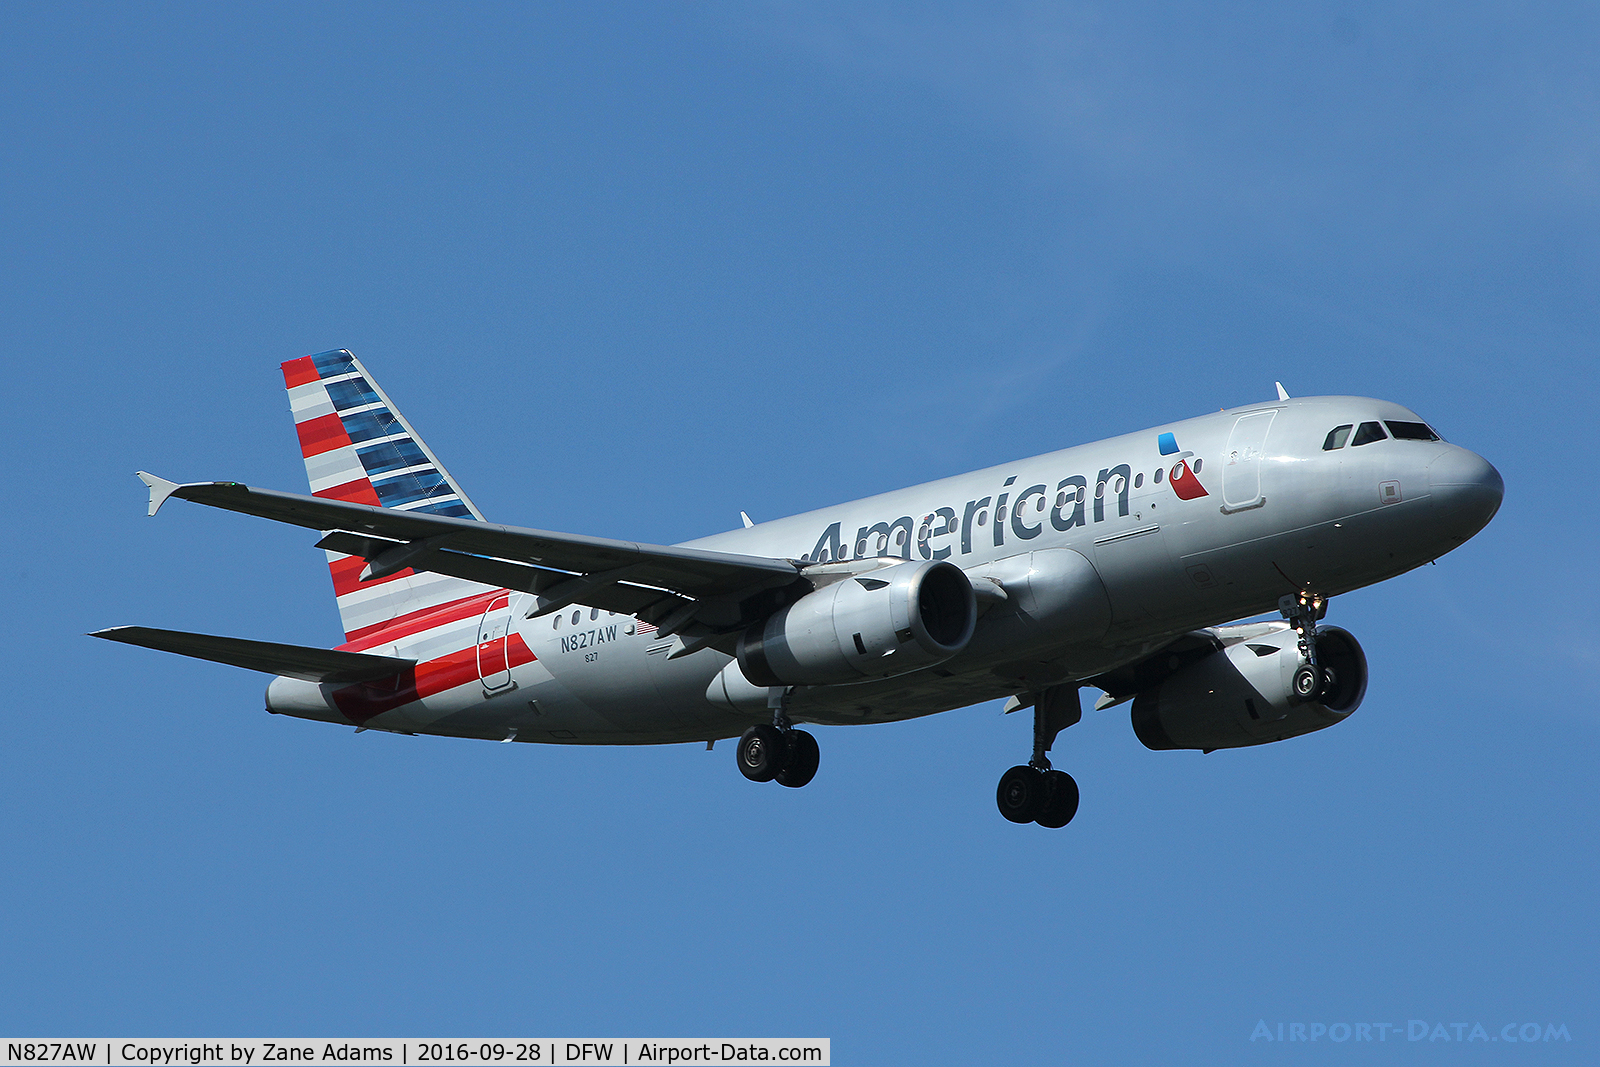 N827AW, 2001 Airbus A319-132 C/N 1547, Arriving at DFW Airport